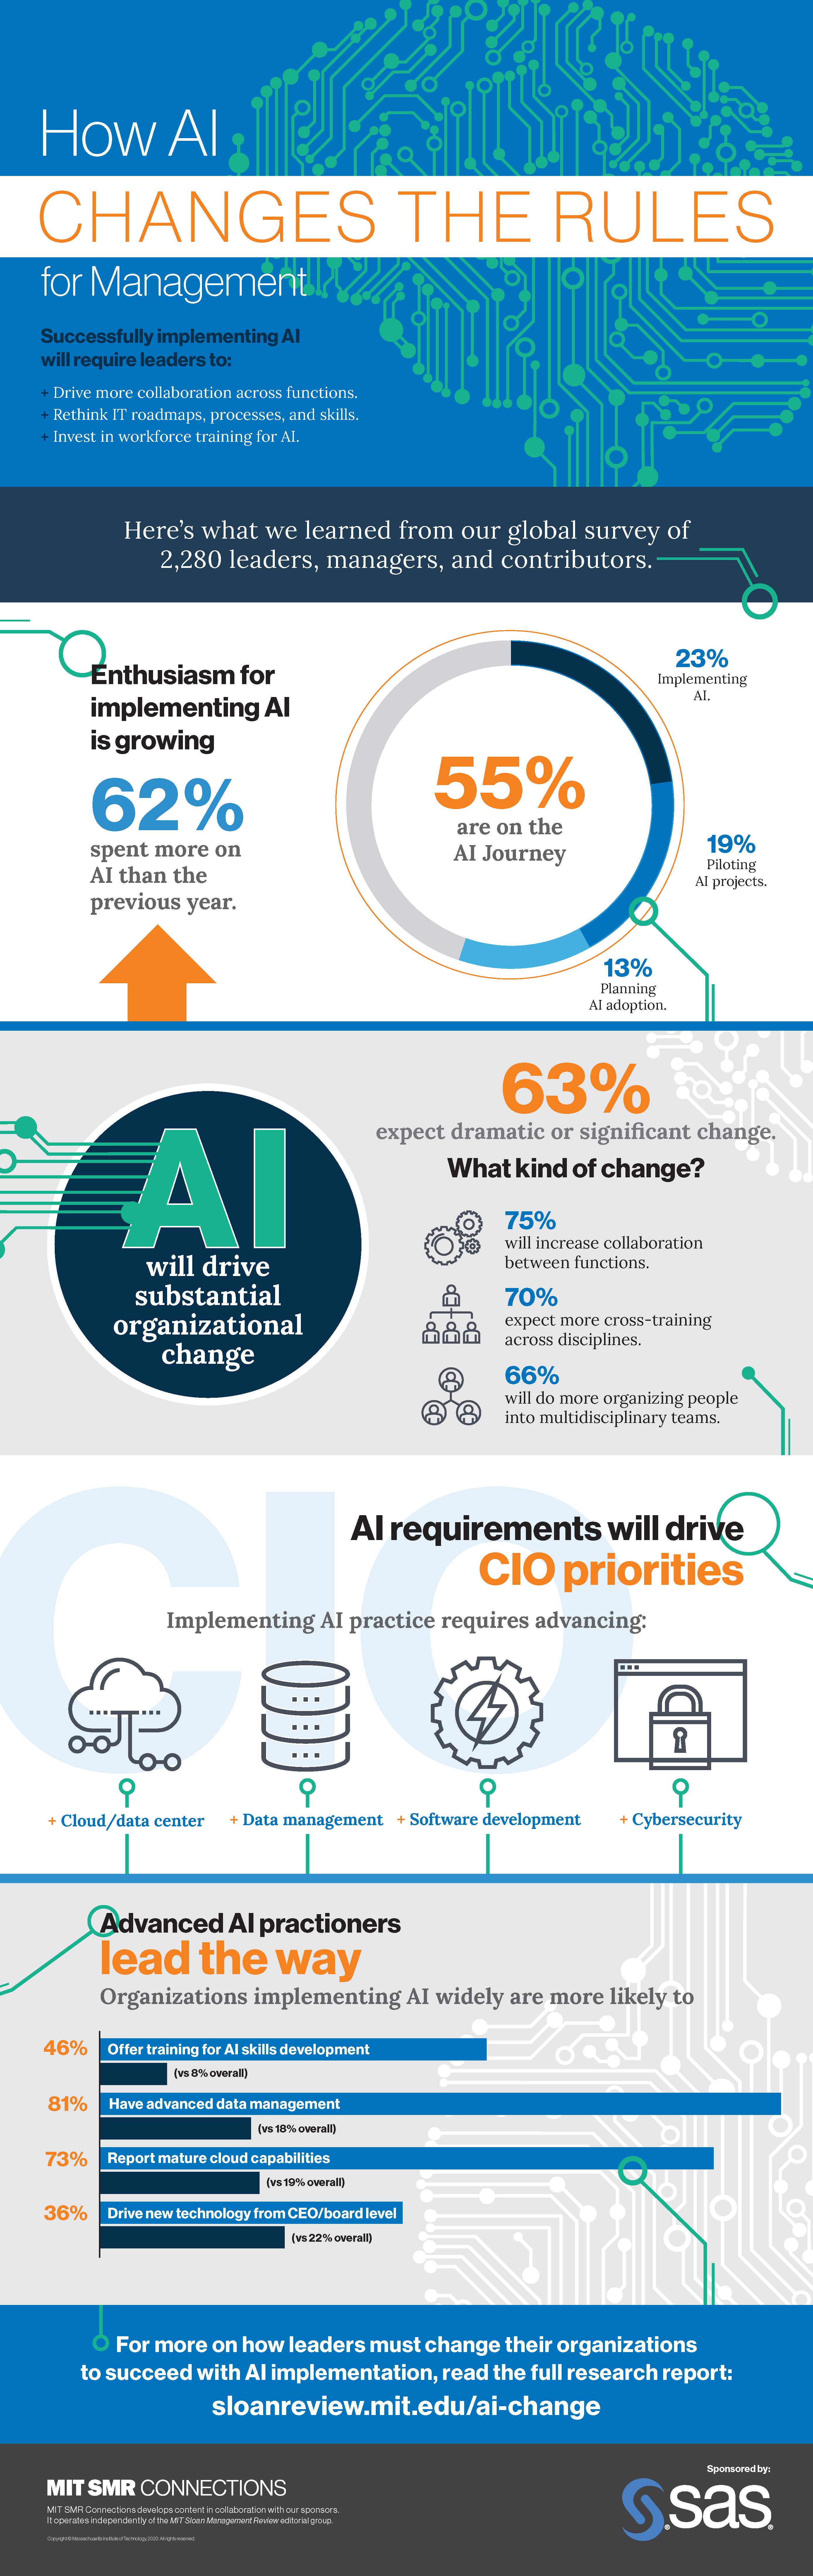 How AI Changes the Rules: New Imperatives for the Intelligent Organization